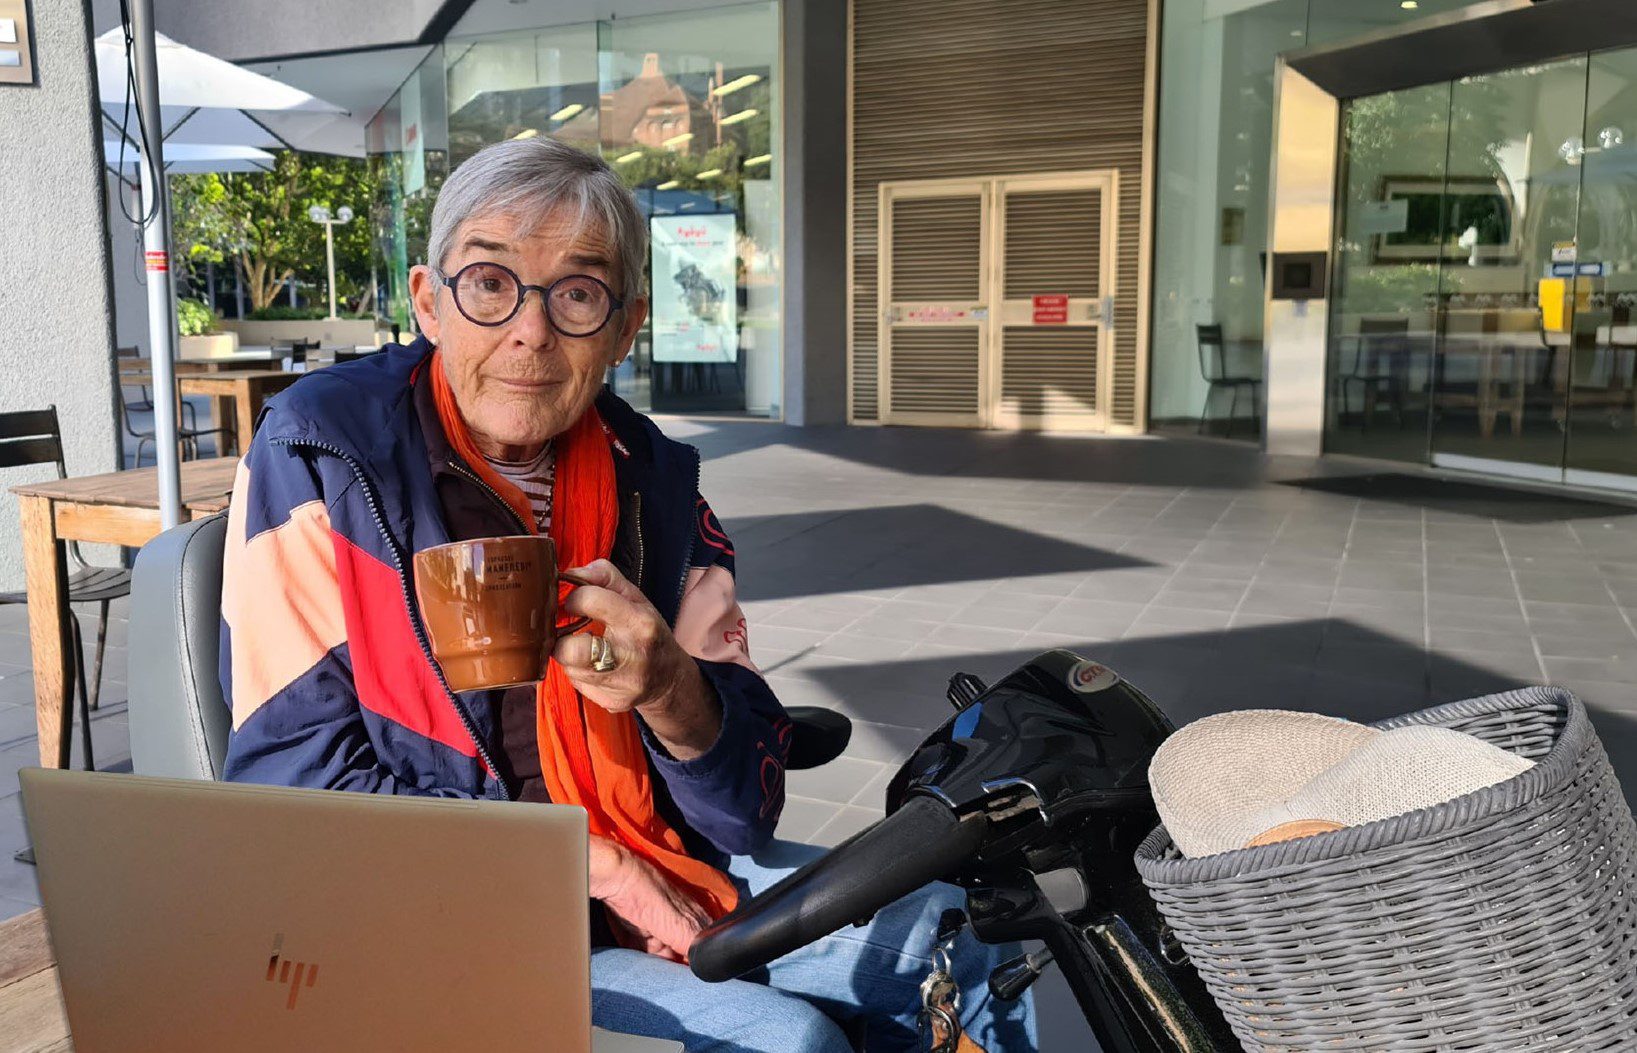 A lady sitting on an electric scooter holding a cup of coffee with a laptop on the table in front of her.